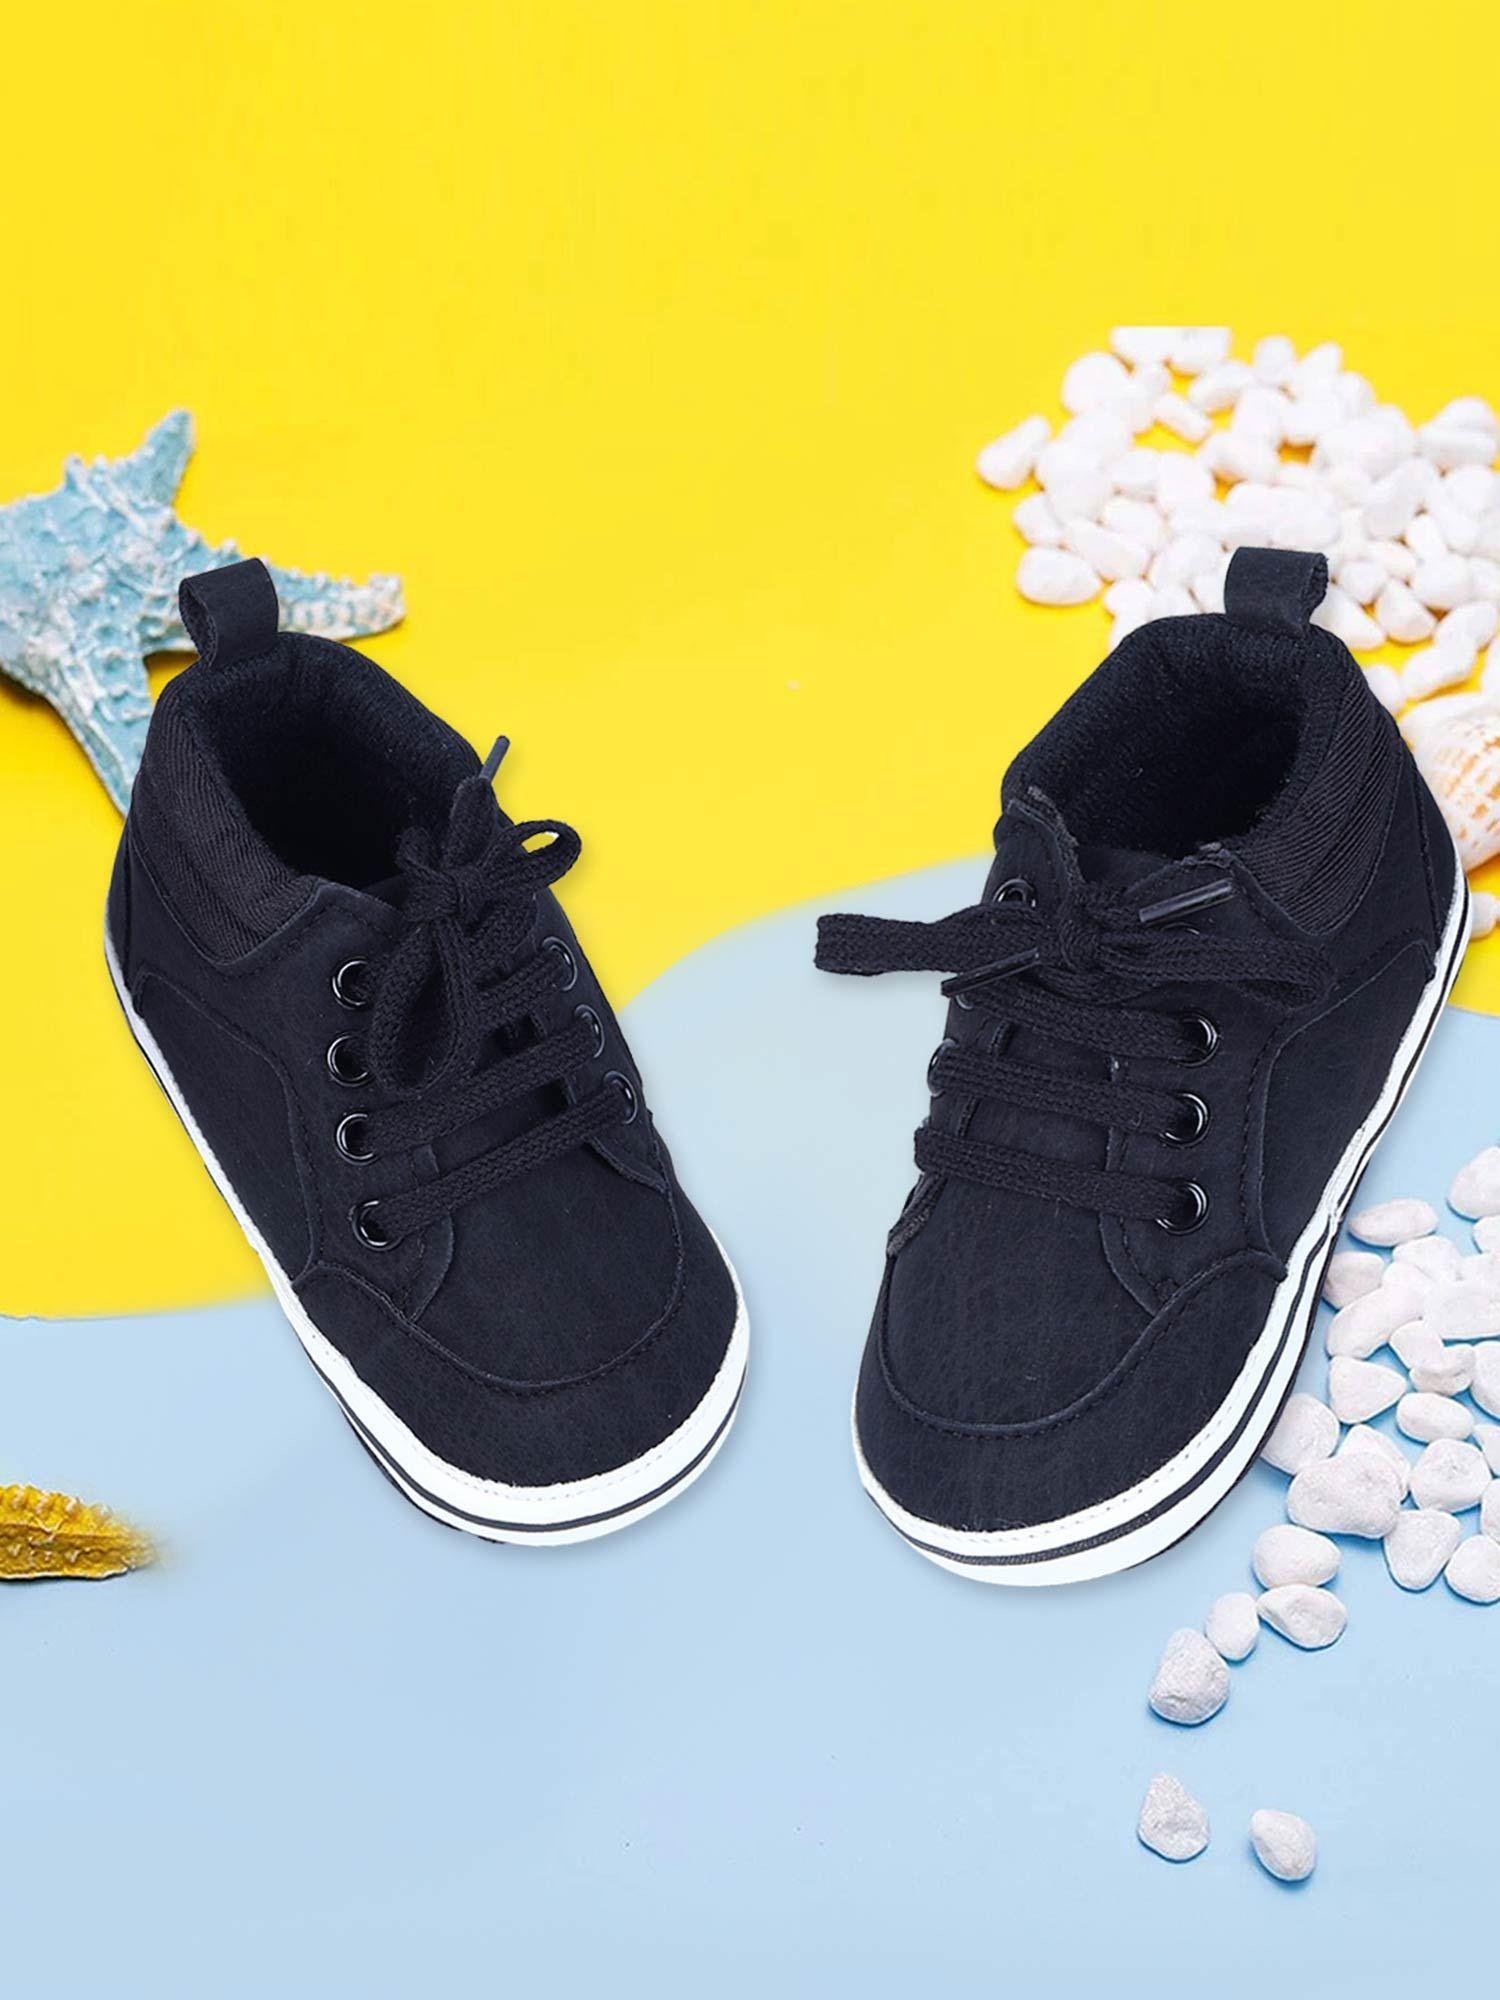 textured leather lace-up stylish kids anti-slip sneaker shoes - black